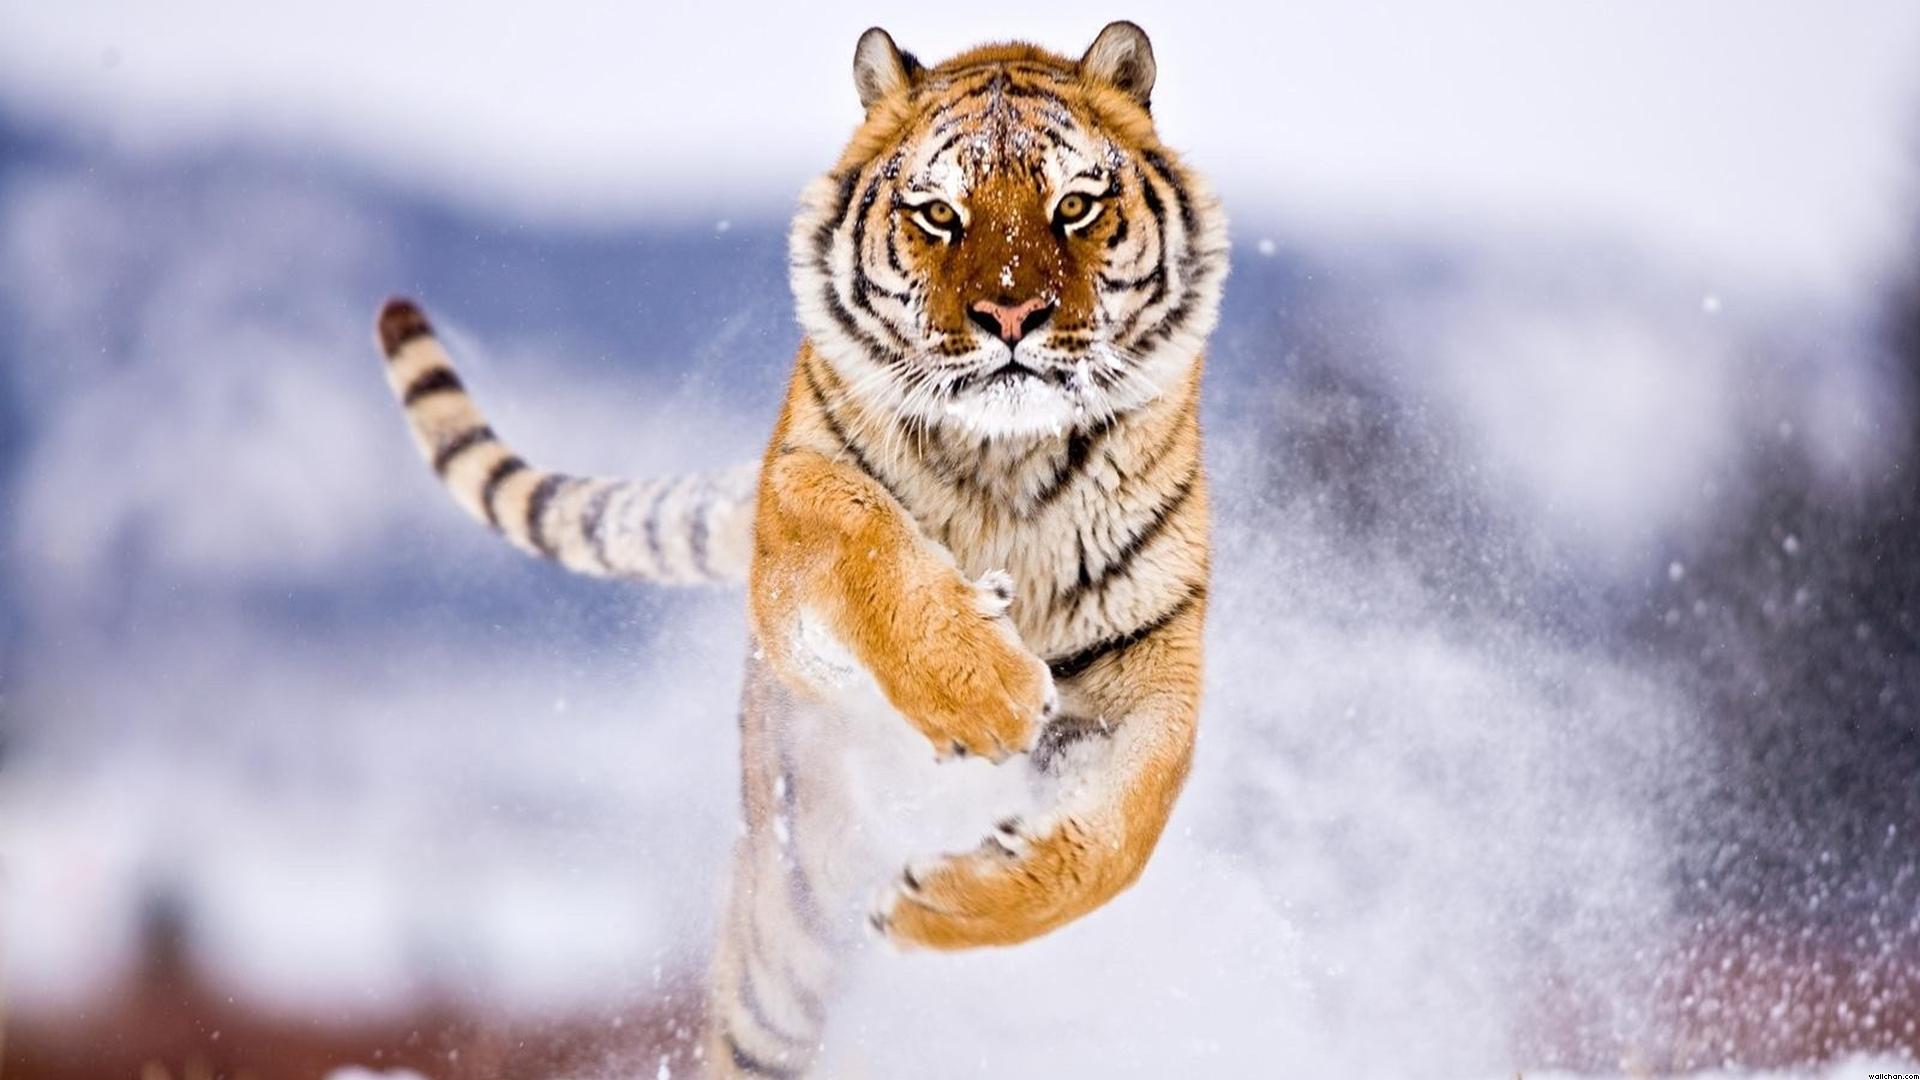 Tiger High Quality Wallpaper Download